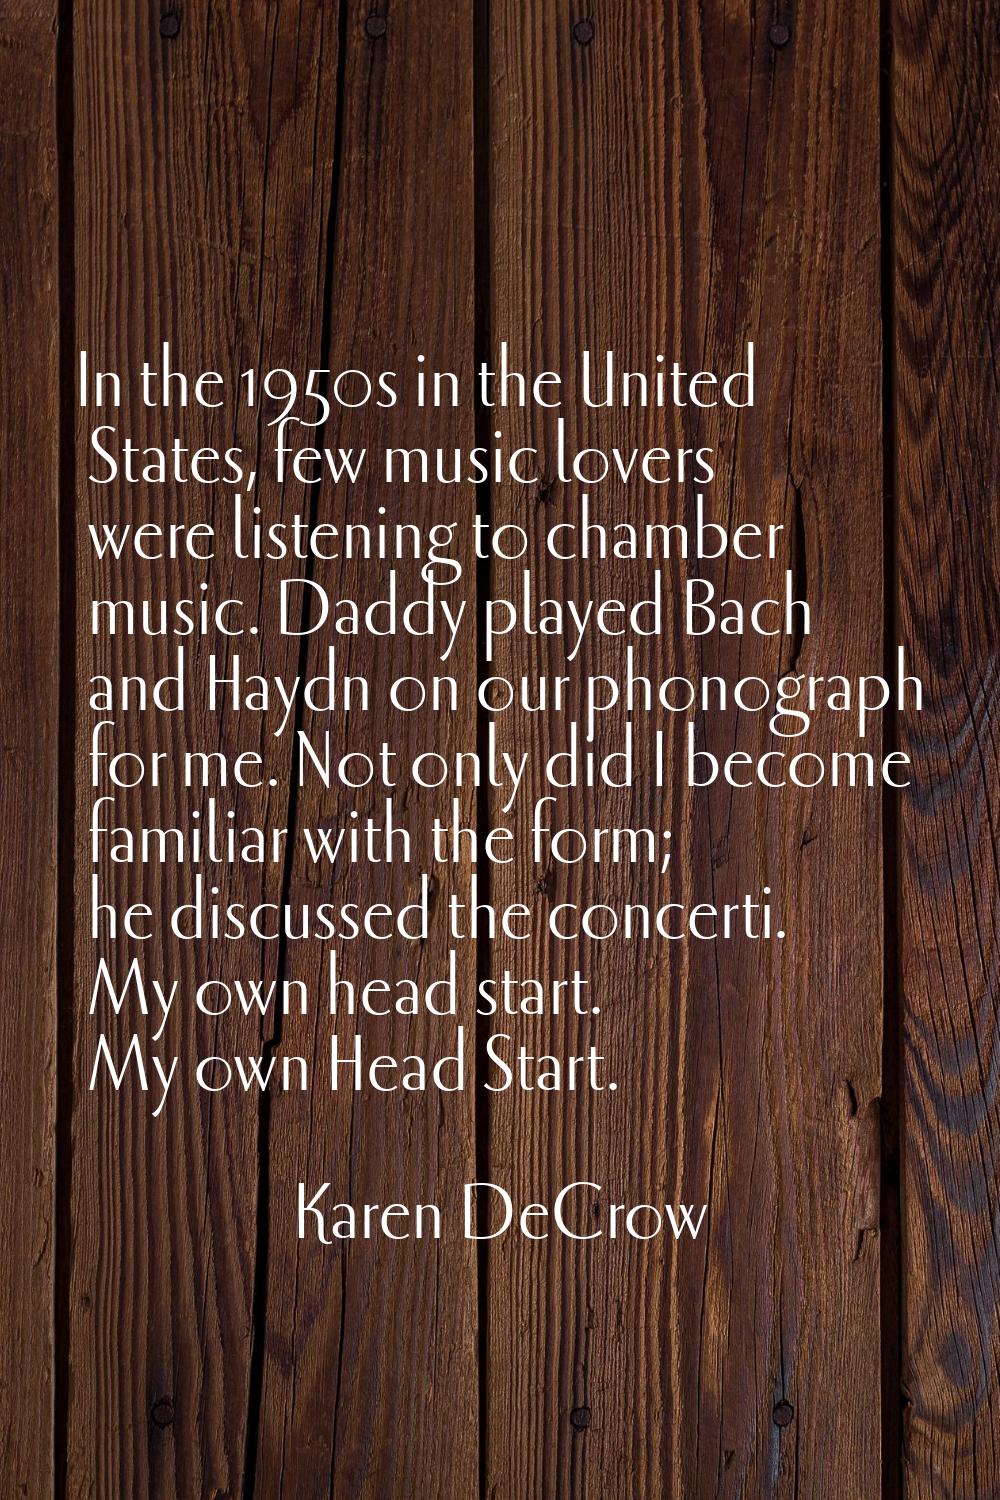 In the 1950s in the United States, few music lovers were listening to chamber music. Daddy played B